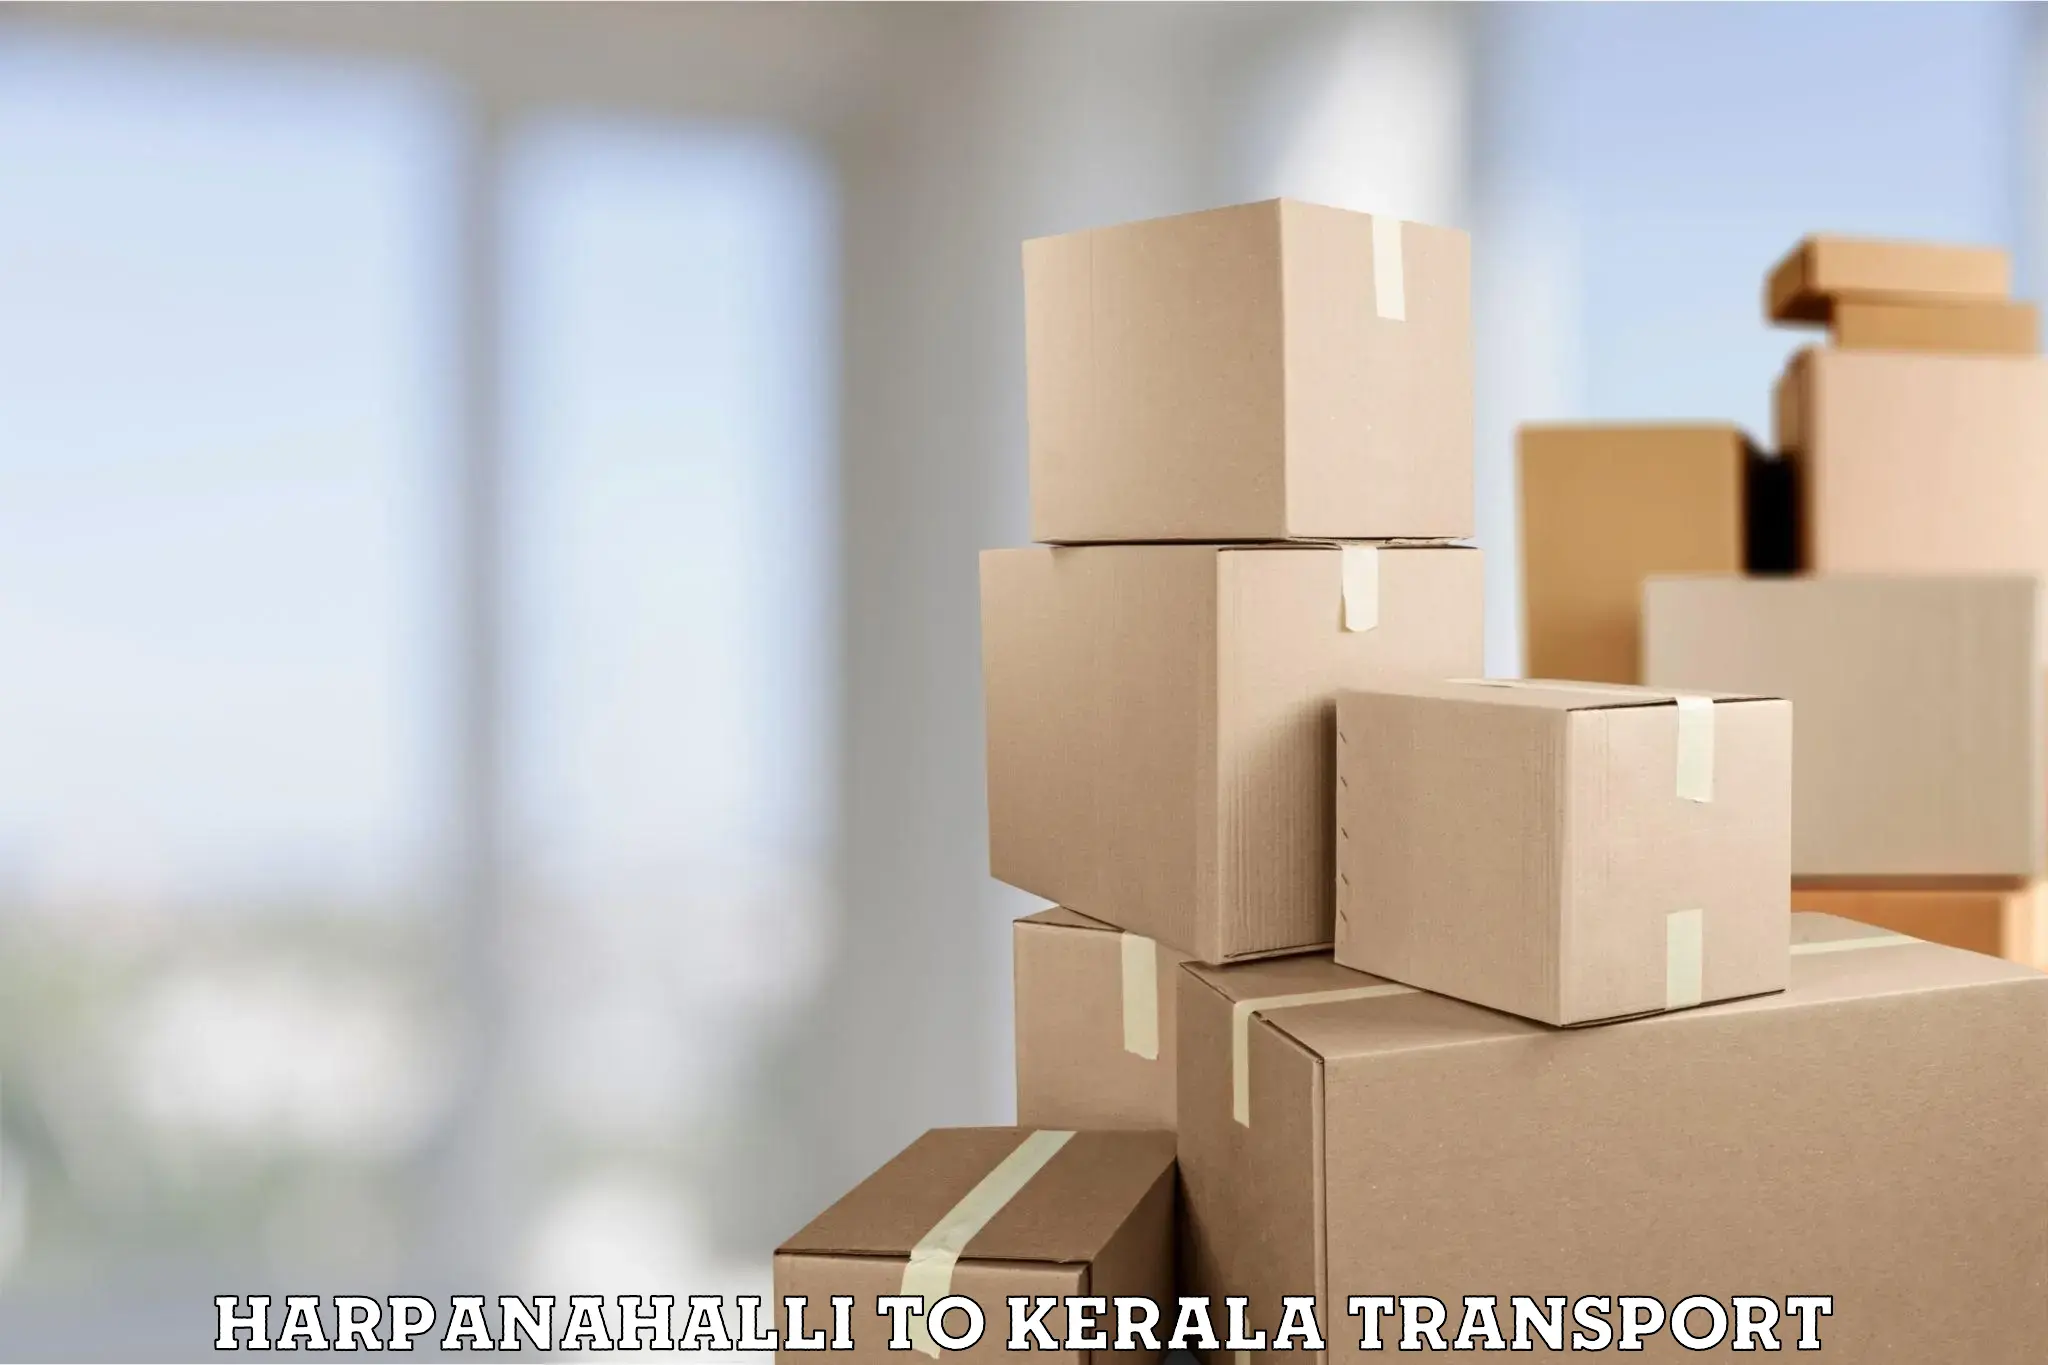 Nationwide transport services Harpanahalli to Parappa